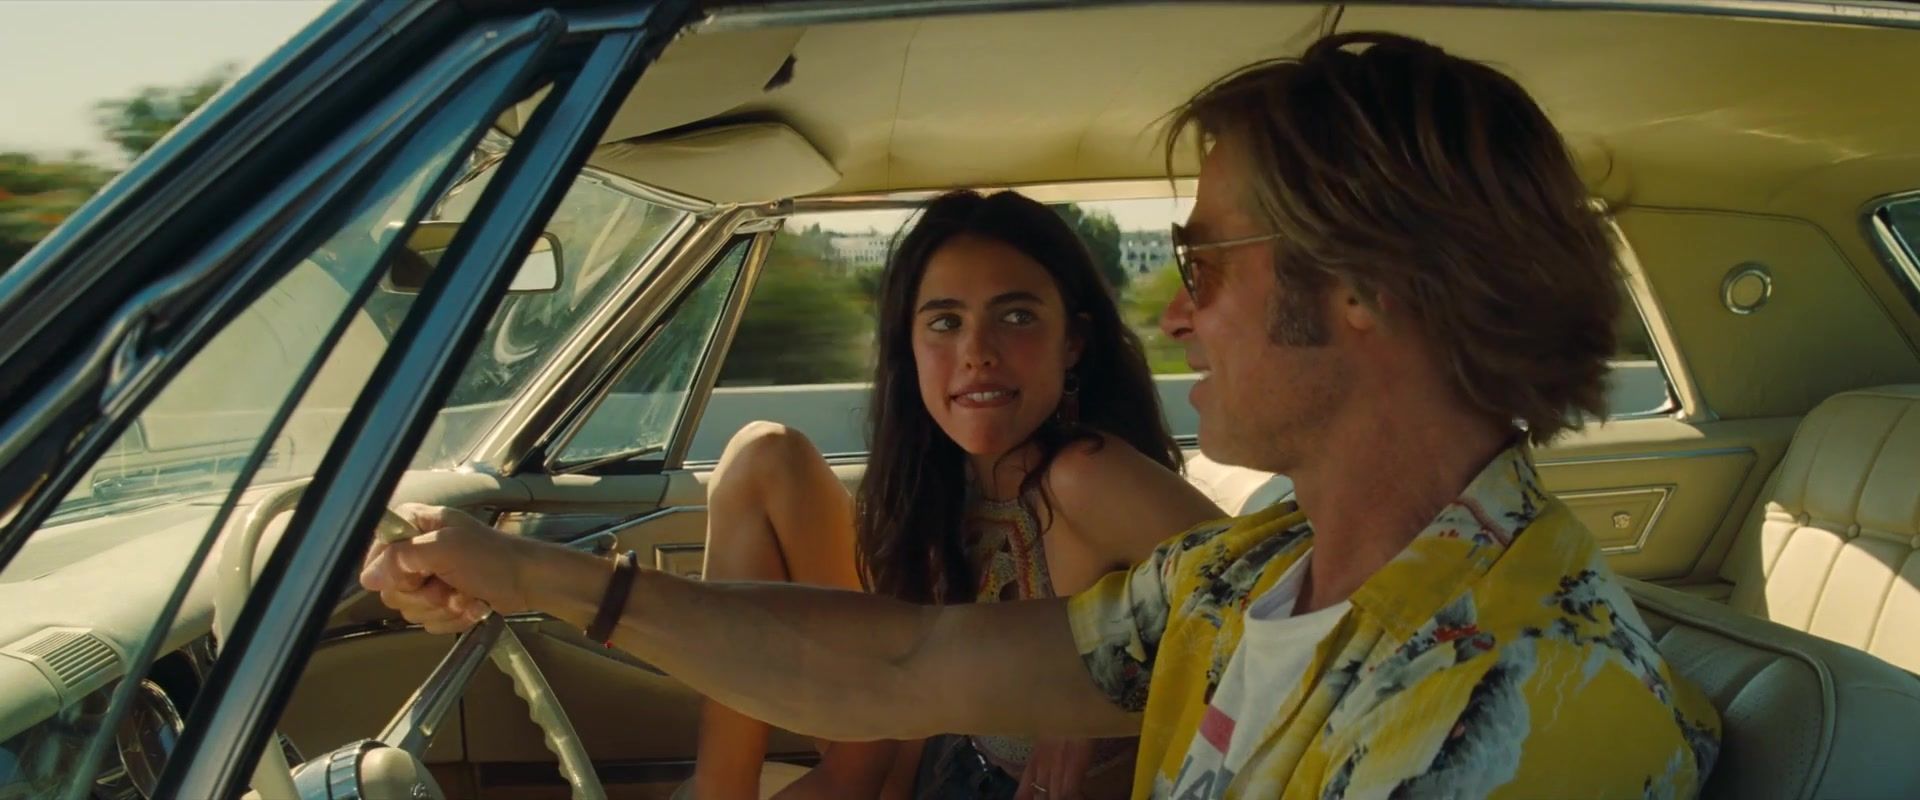 Cunnilingus Sexy Dakota Fanning, Margaret Qualley naked- Once Upon A Time In Hollywood (2019) Carro - 1